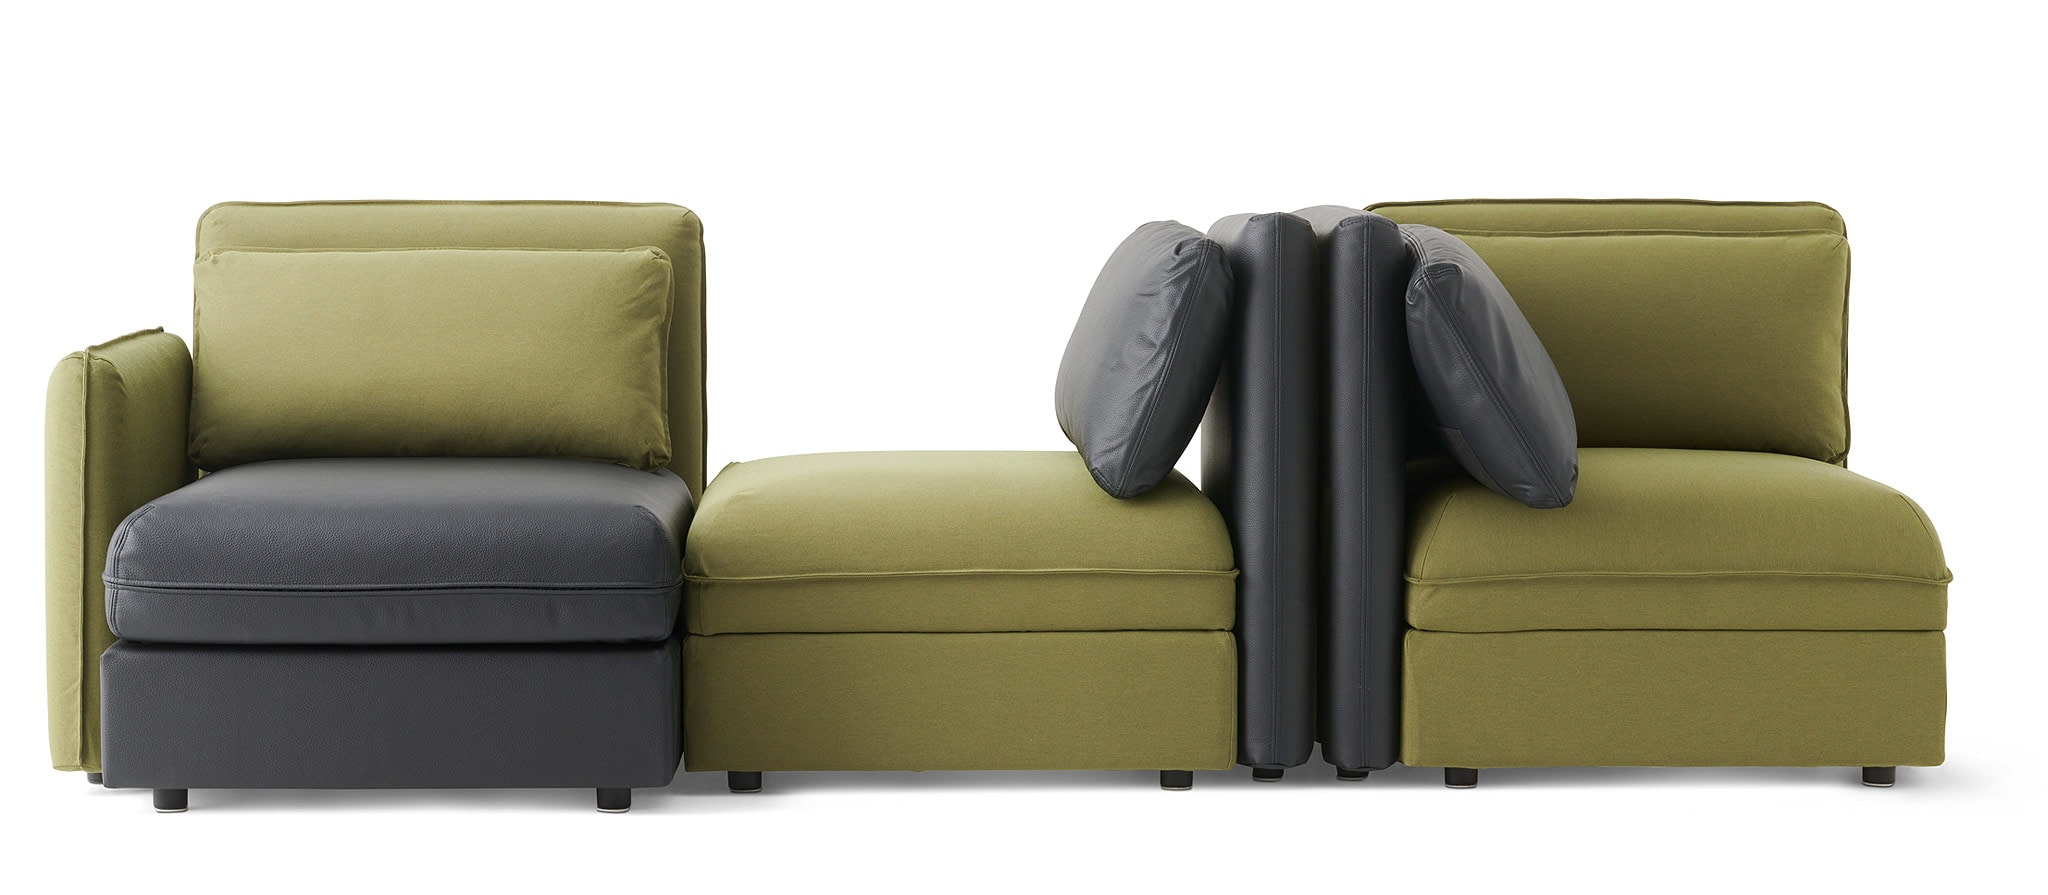 This combination of olive green and black VALLENTUNA modules can form a  dynamic sofa that sits